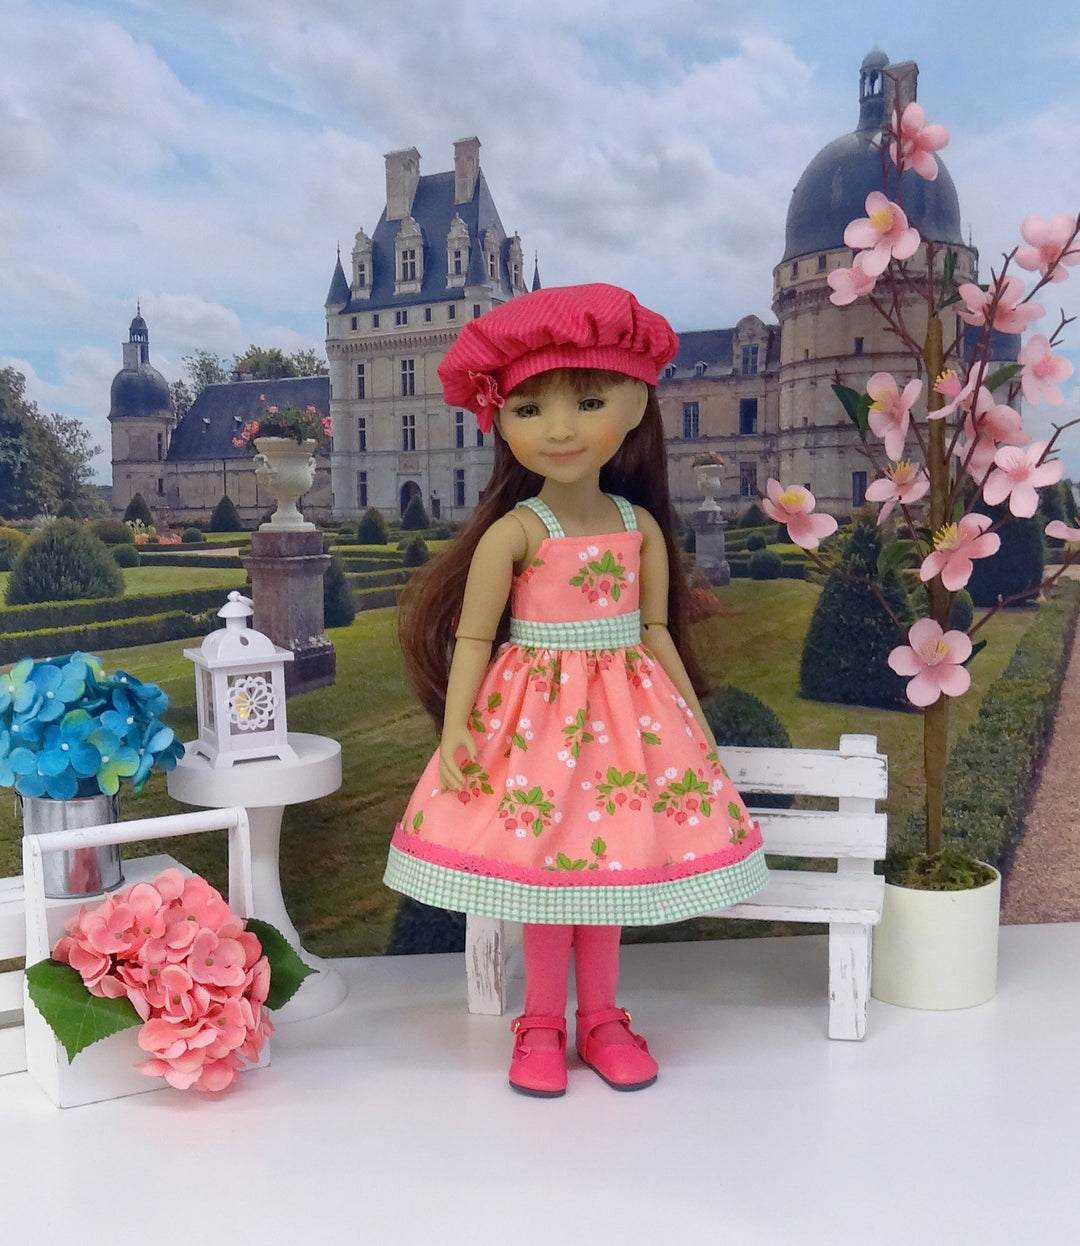 Garden Party - dress & jacket for Ruby Red Fashion Friends doll